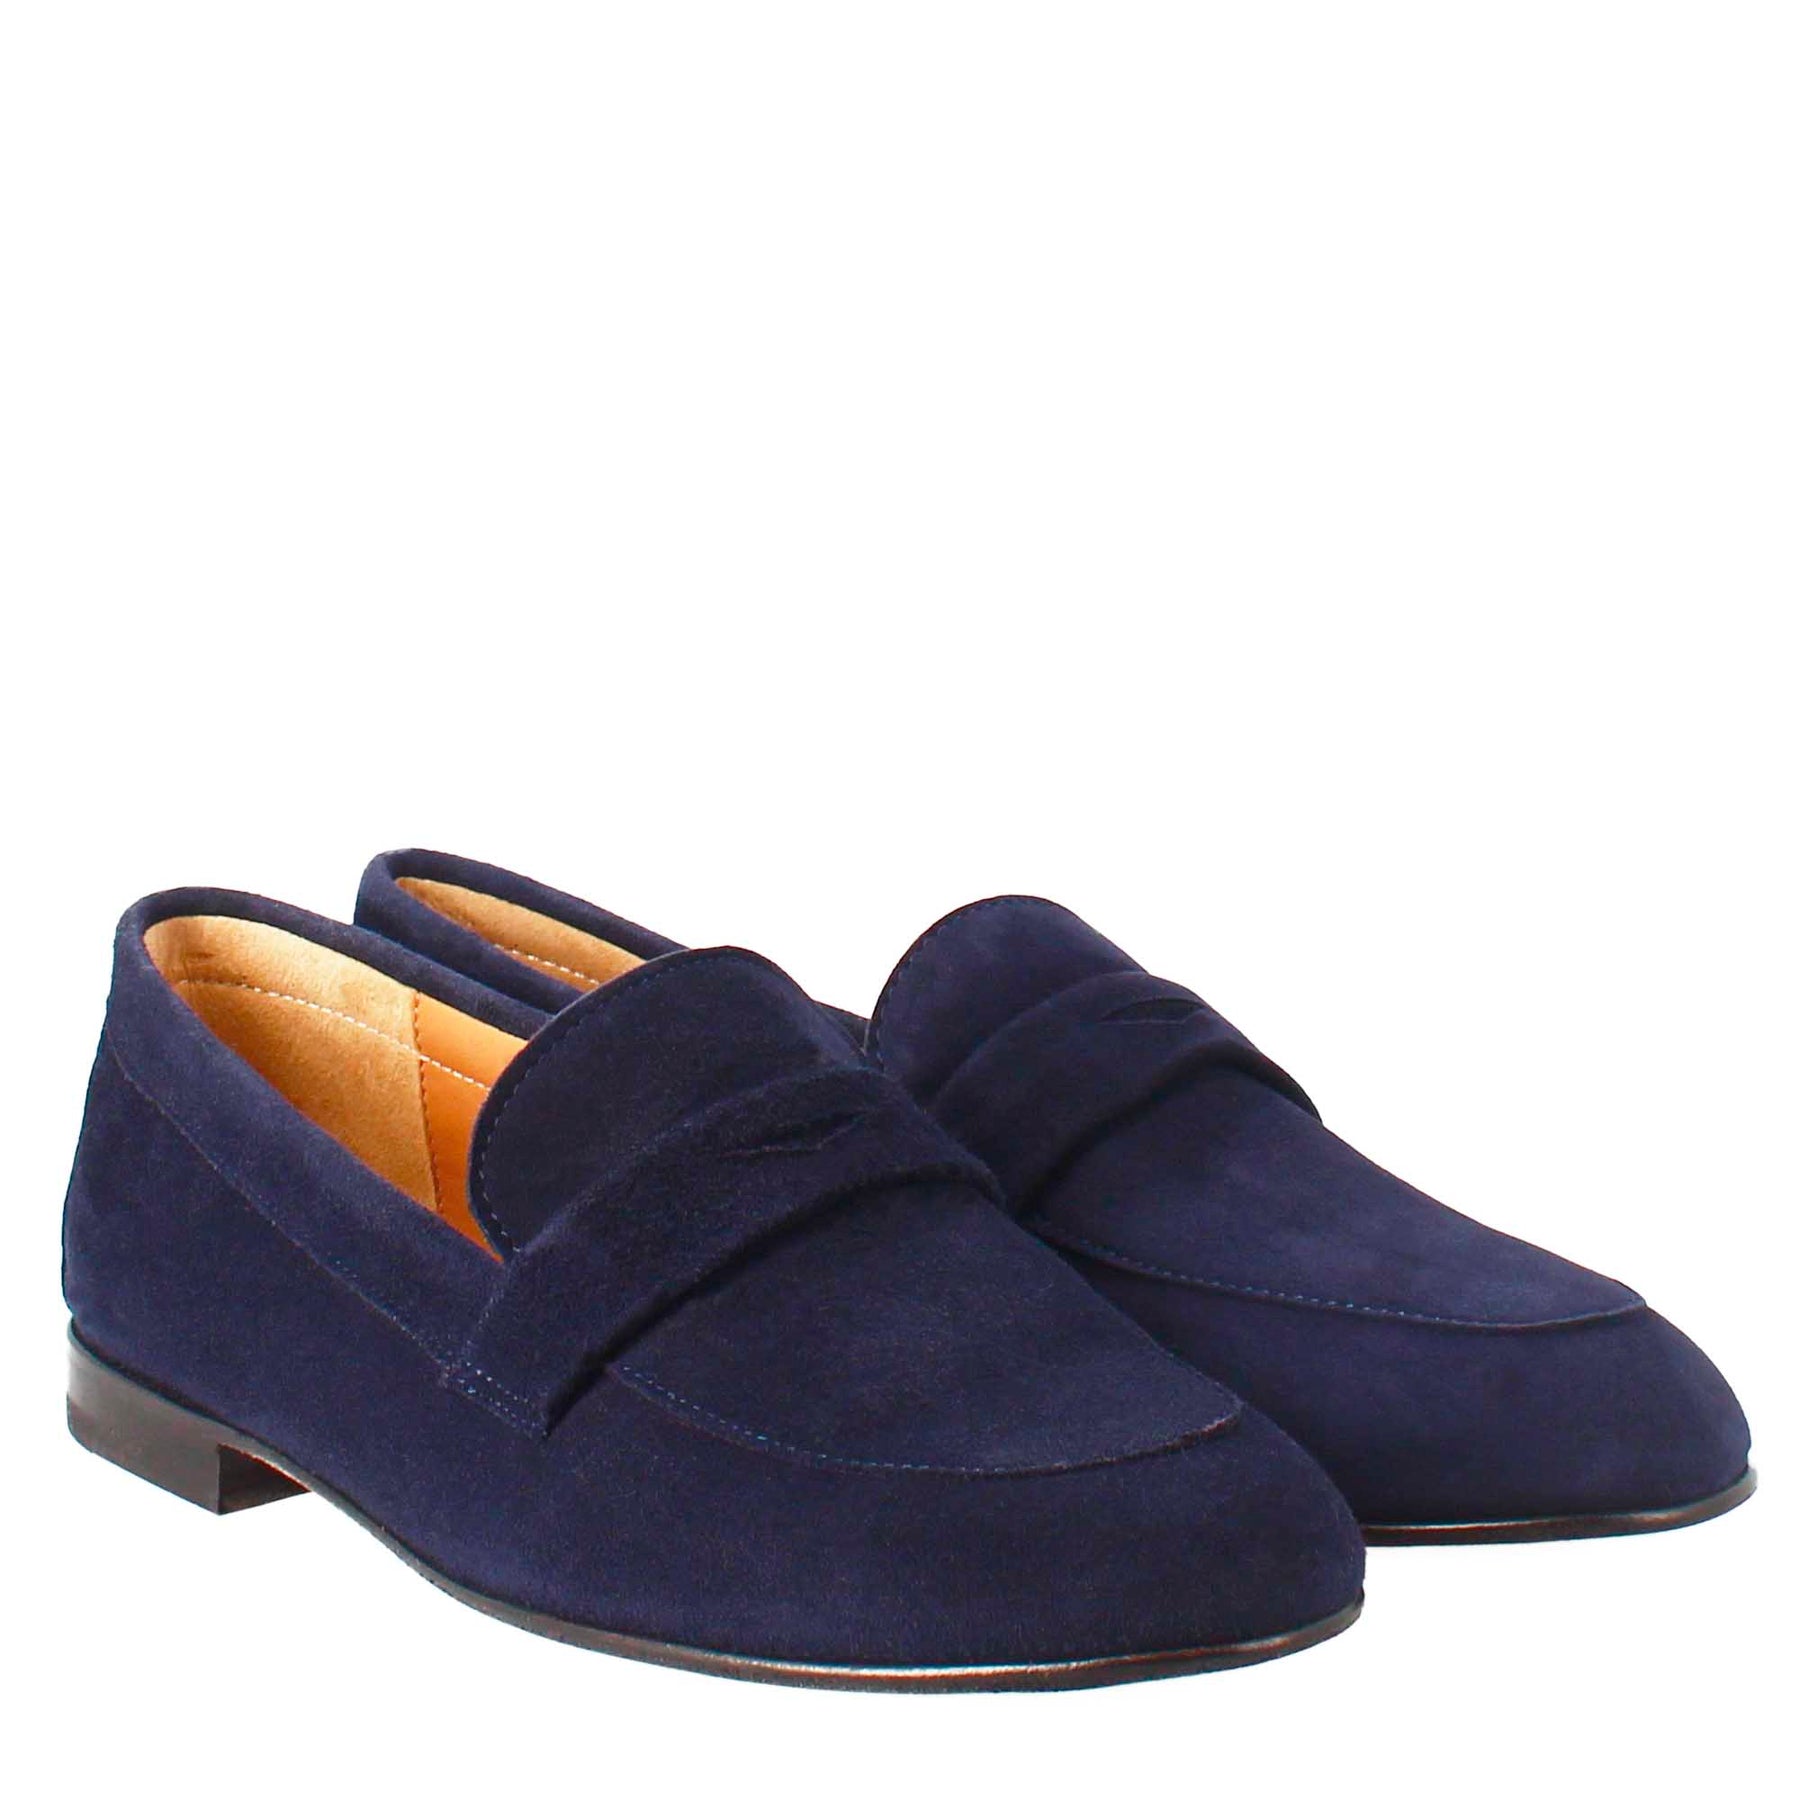 Women's bag moccasin in blue suede